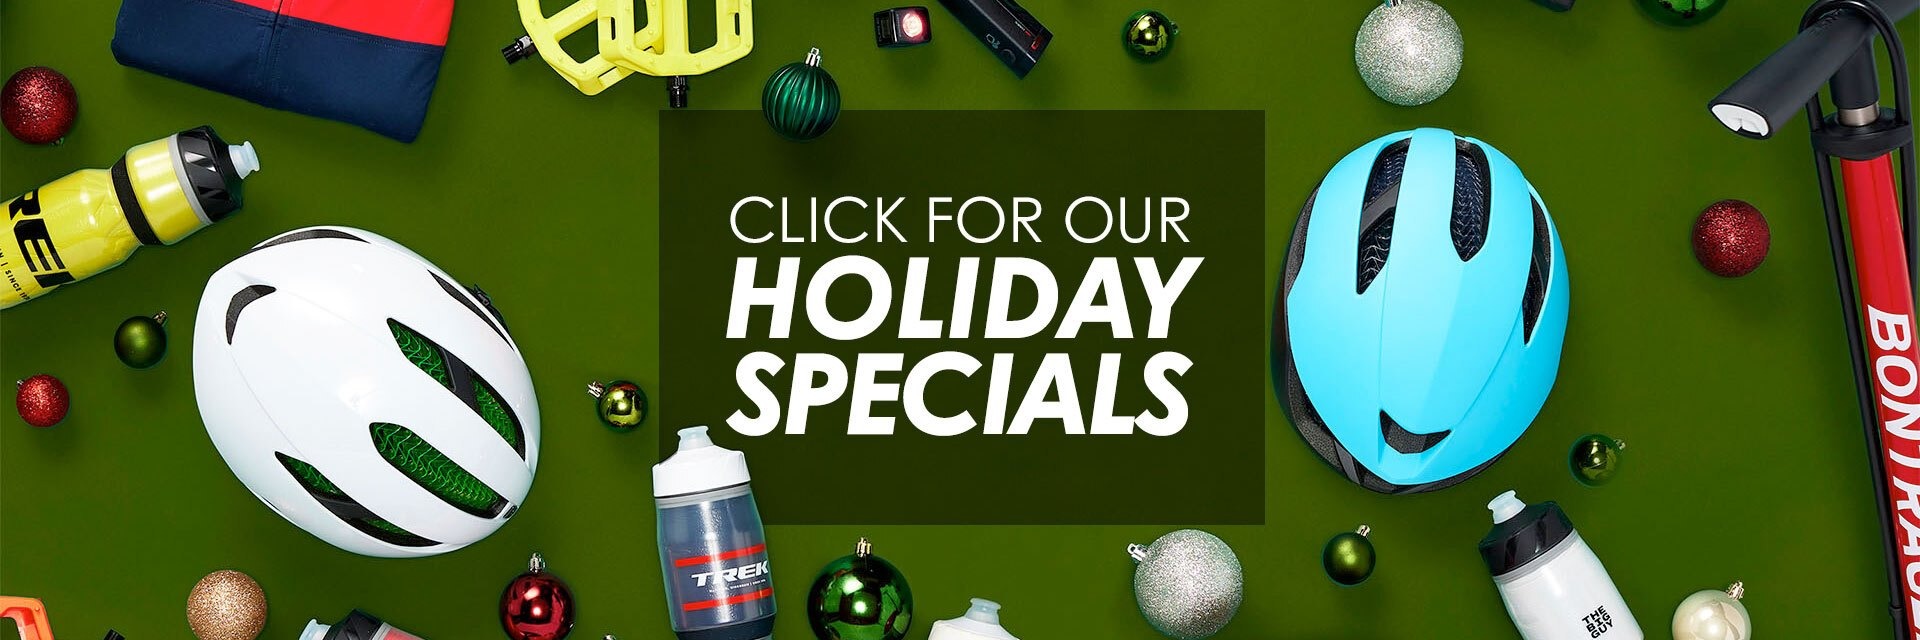 A graphic that reads "click for our holiday specials" with a photo of helmets and tree ornaments scattered around a green background.